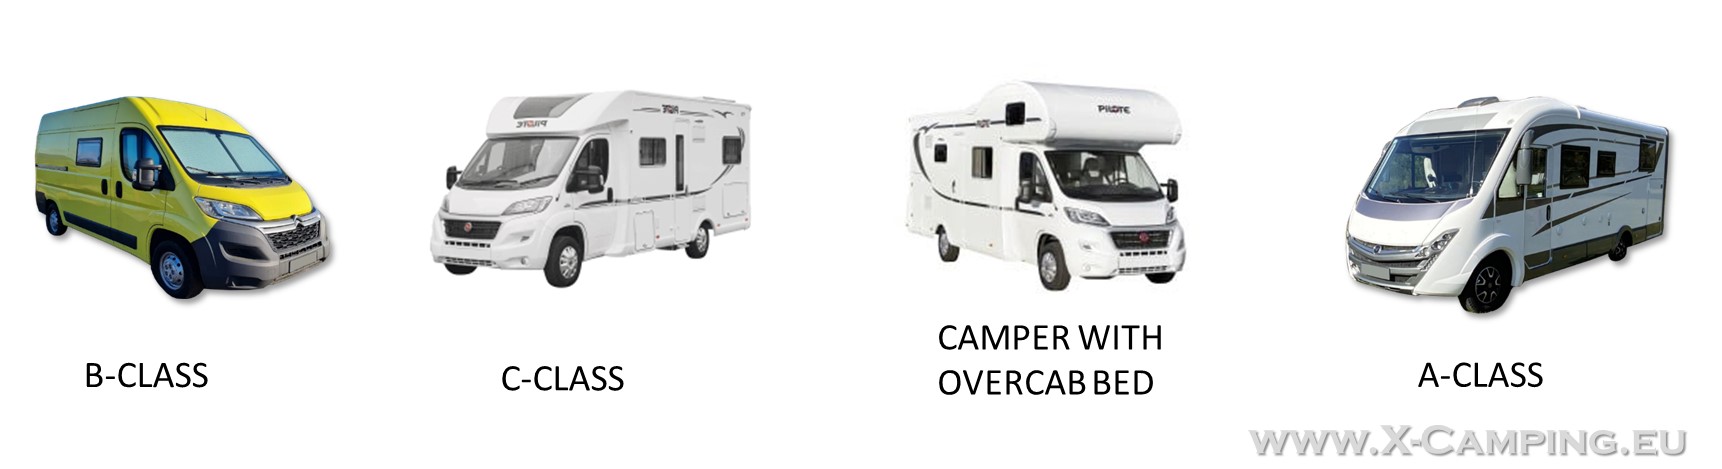 Types of campers